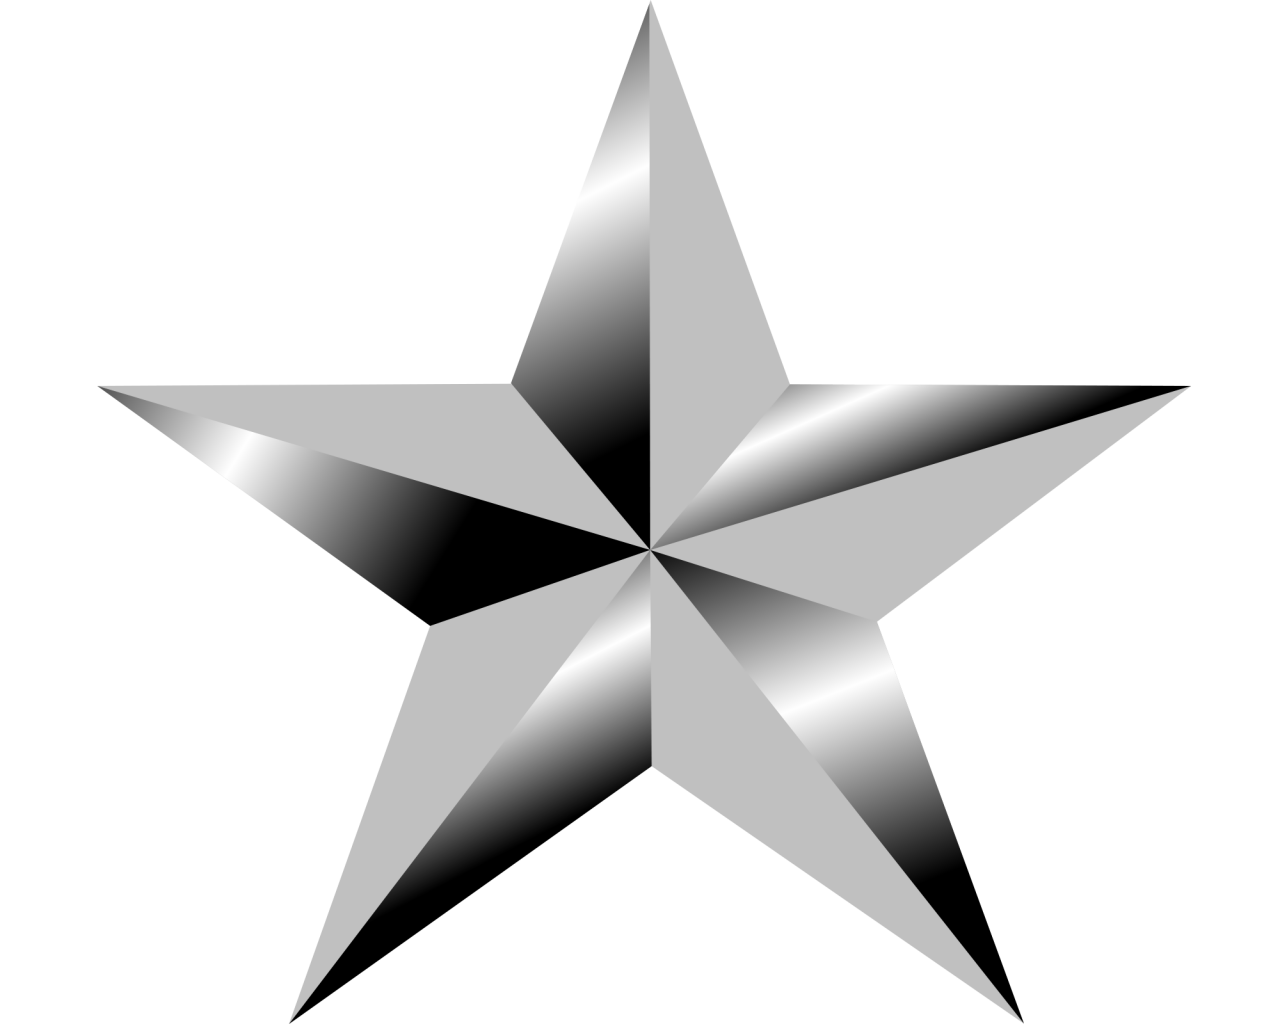 Silver Star PNG Image - PurePNG | Free transparent CC0 PNG ...